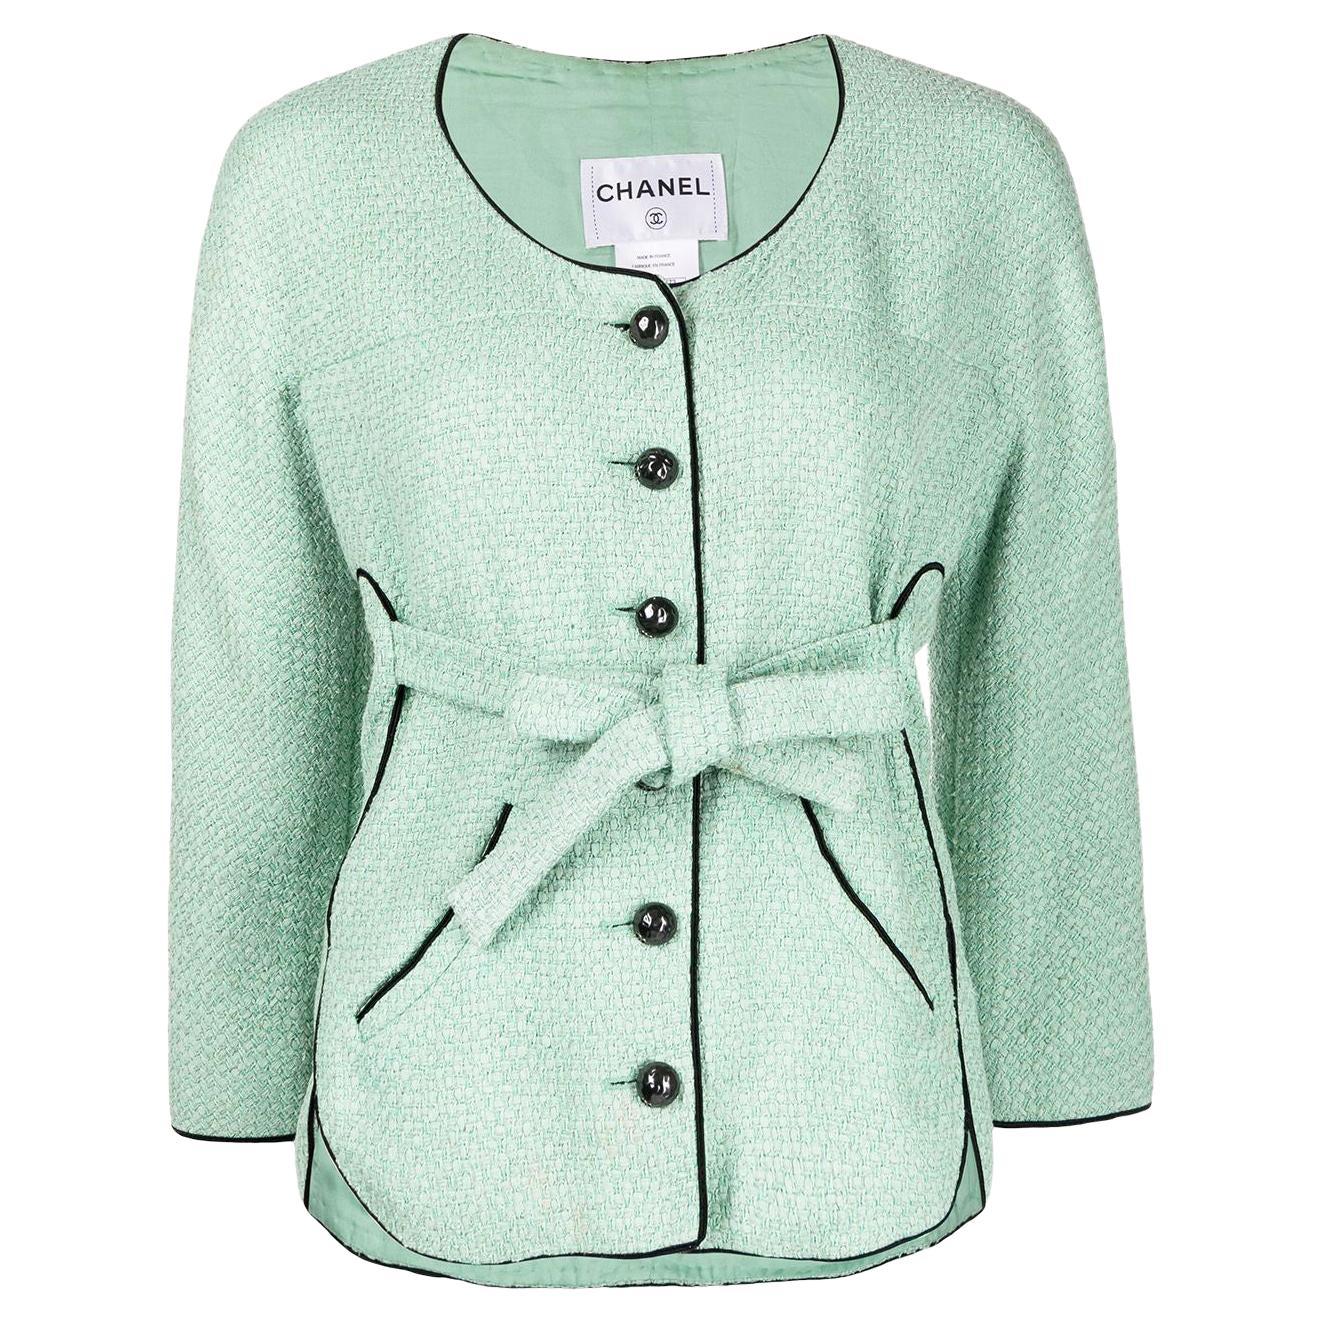 Chanel Vogue Cover Turquoise Tweed Jacket with Belt For Sale